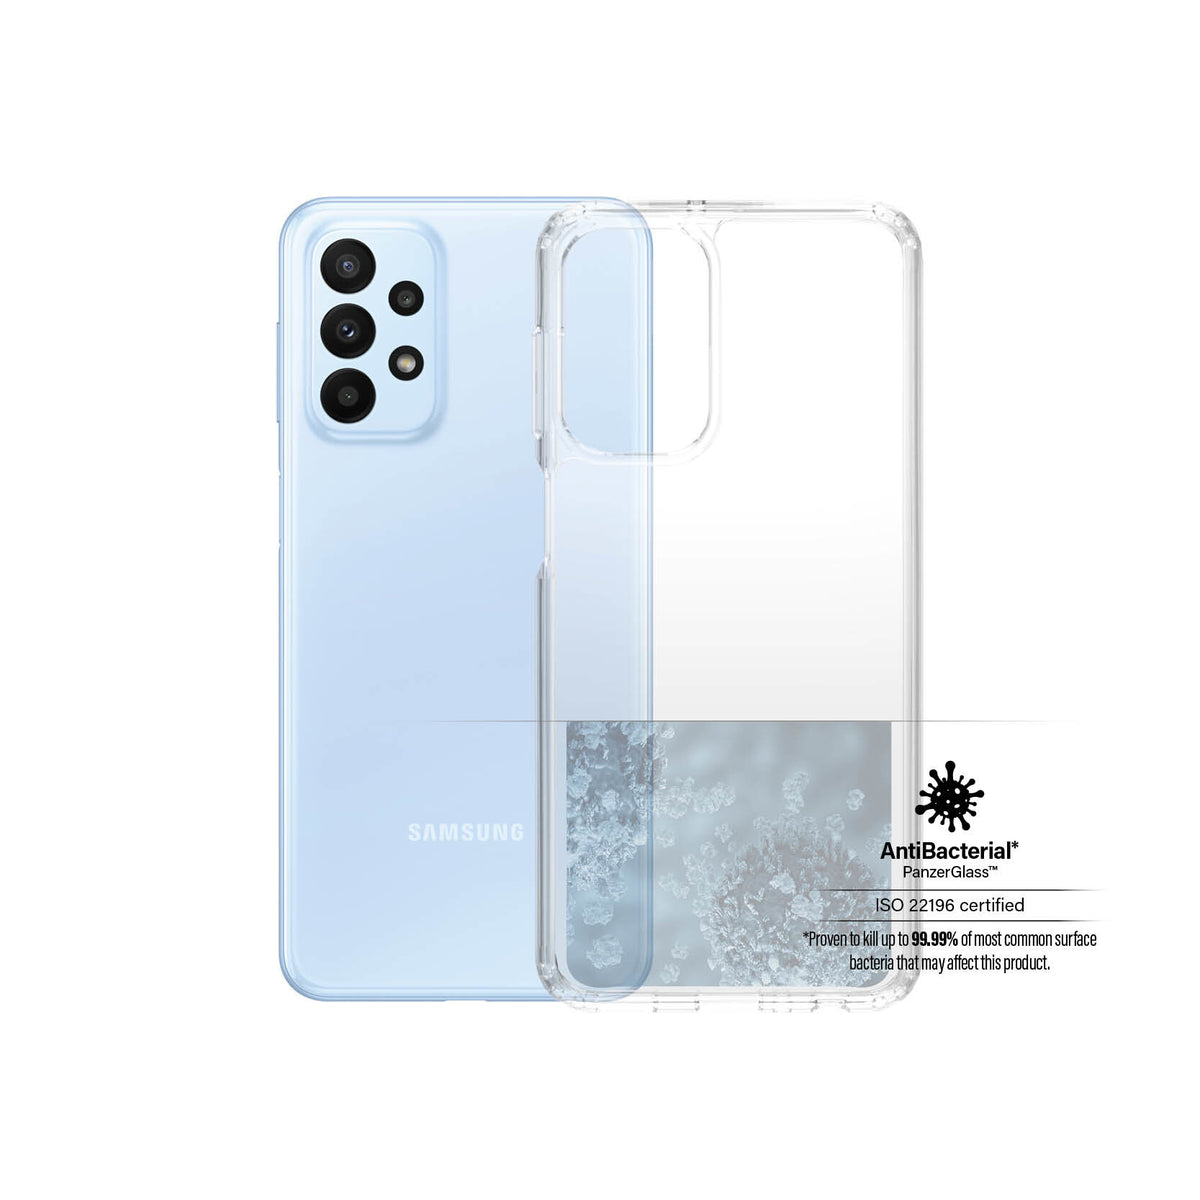 PanzerGlass ™ HardCase for Samsung A23 in Transparent